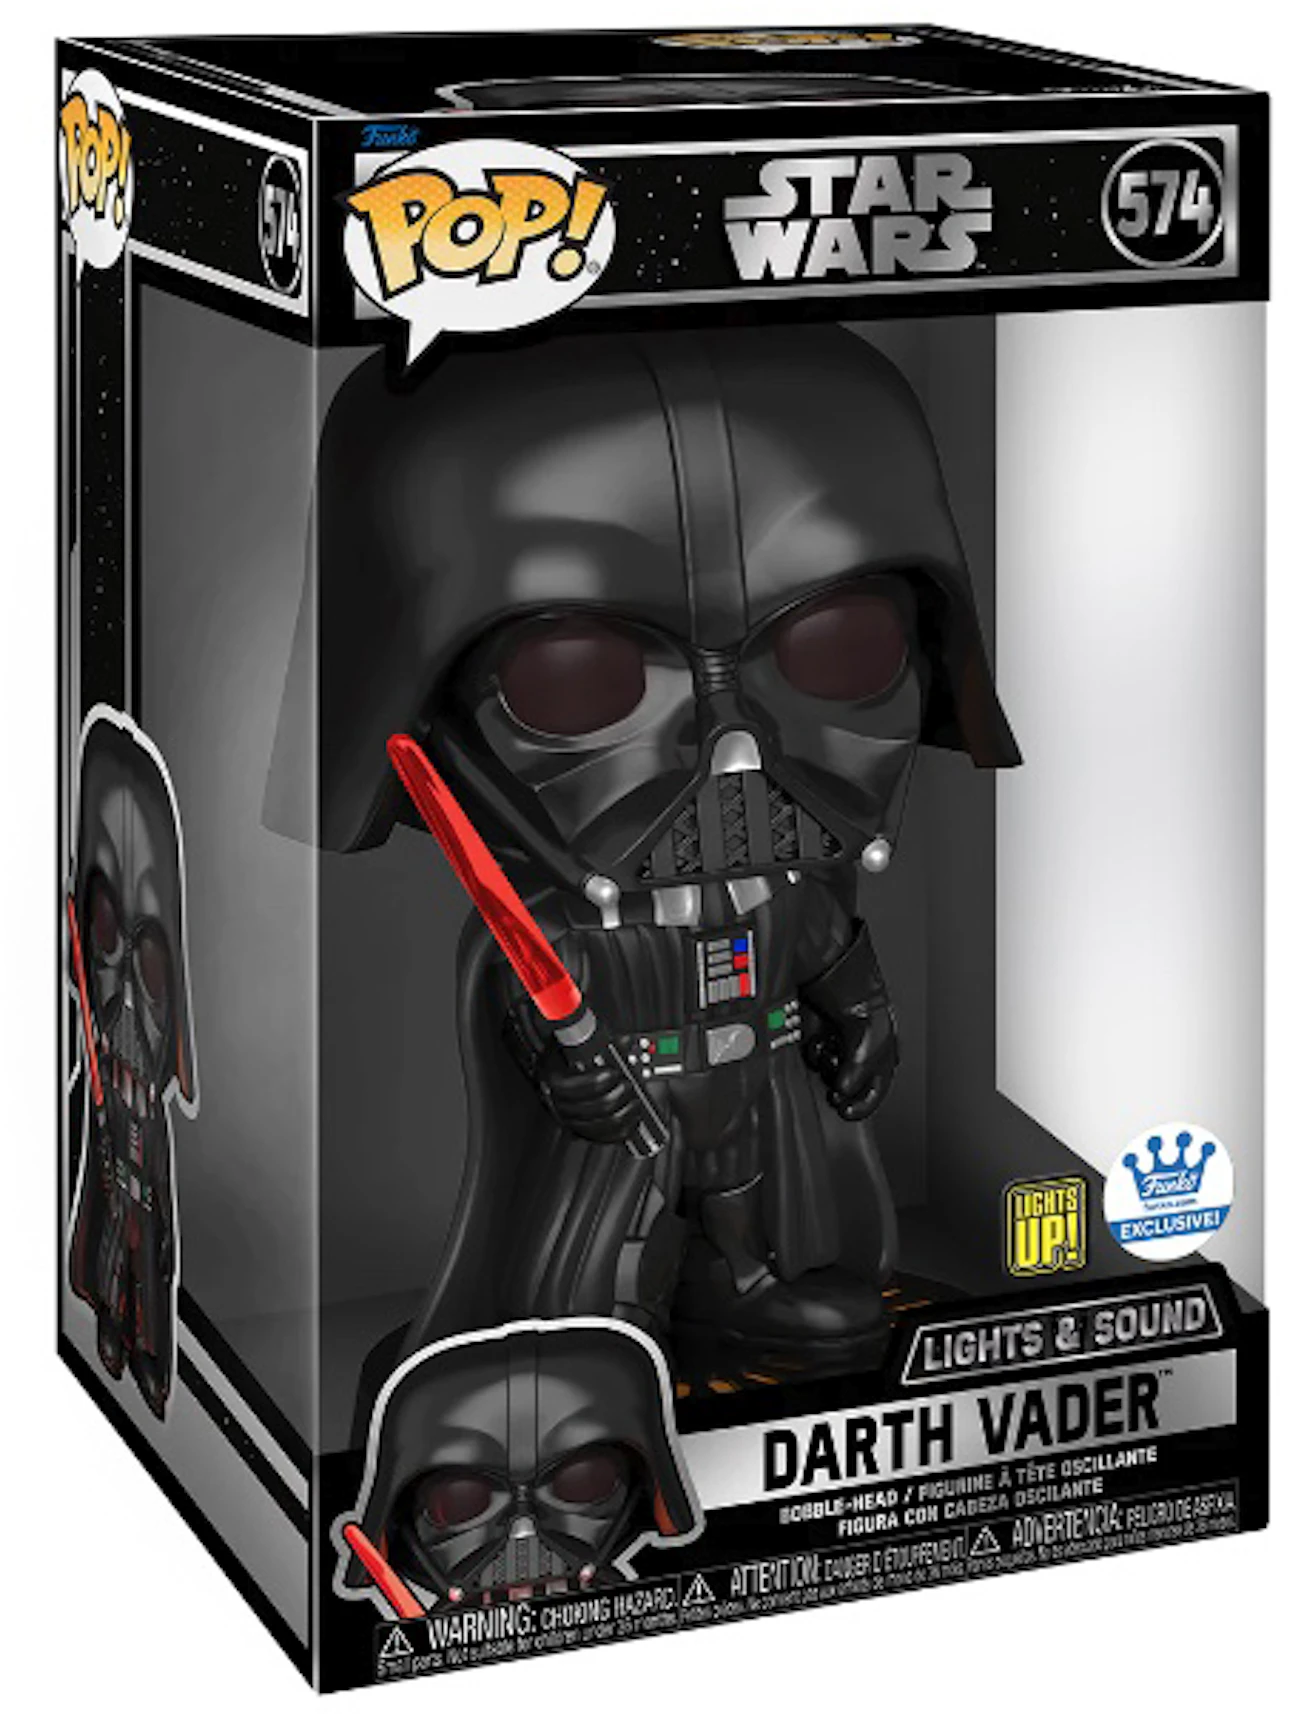 Baffle Italiaans overzien Funko Pop! Star Wars Darth Vader 10 Inch with Lights and Sounds Funko Shop  Exclusive Figure #574 - US